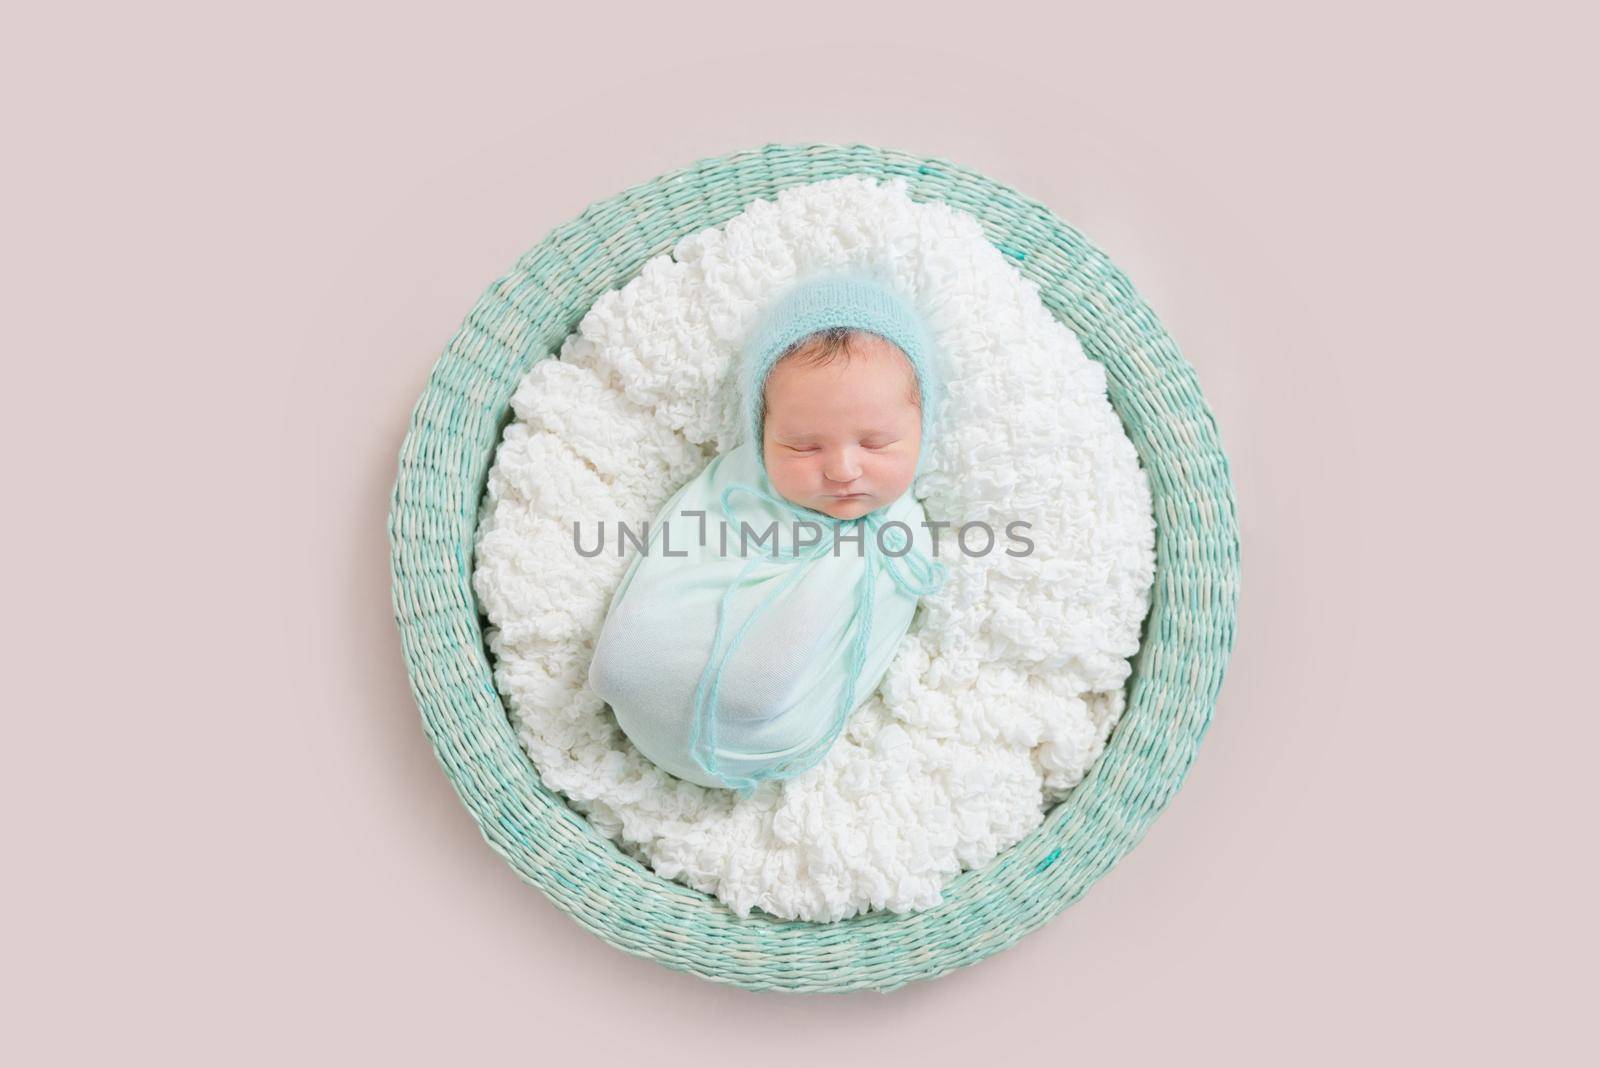 Adorable baby wrapped in blue blanket sleeping on white and blue bedding, in basket, topview